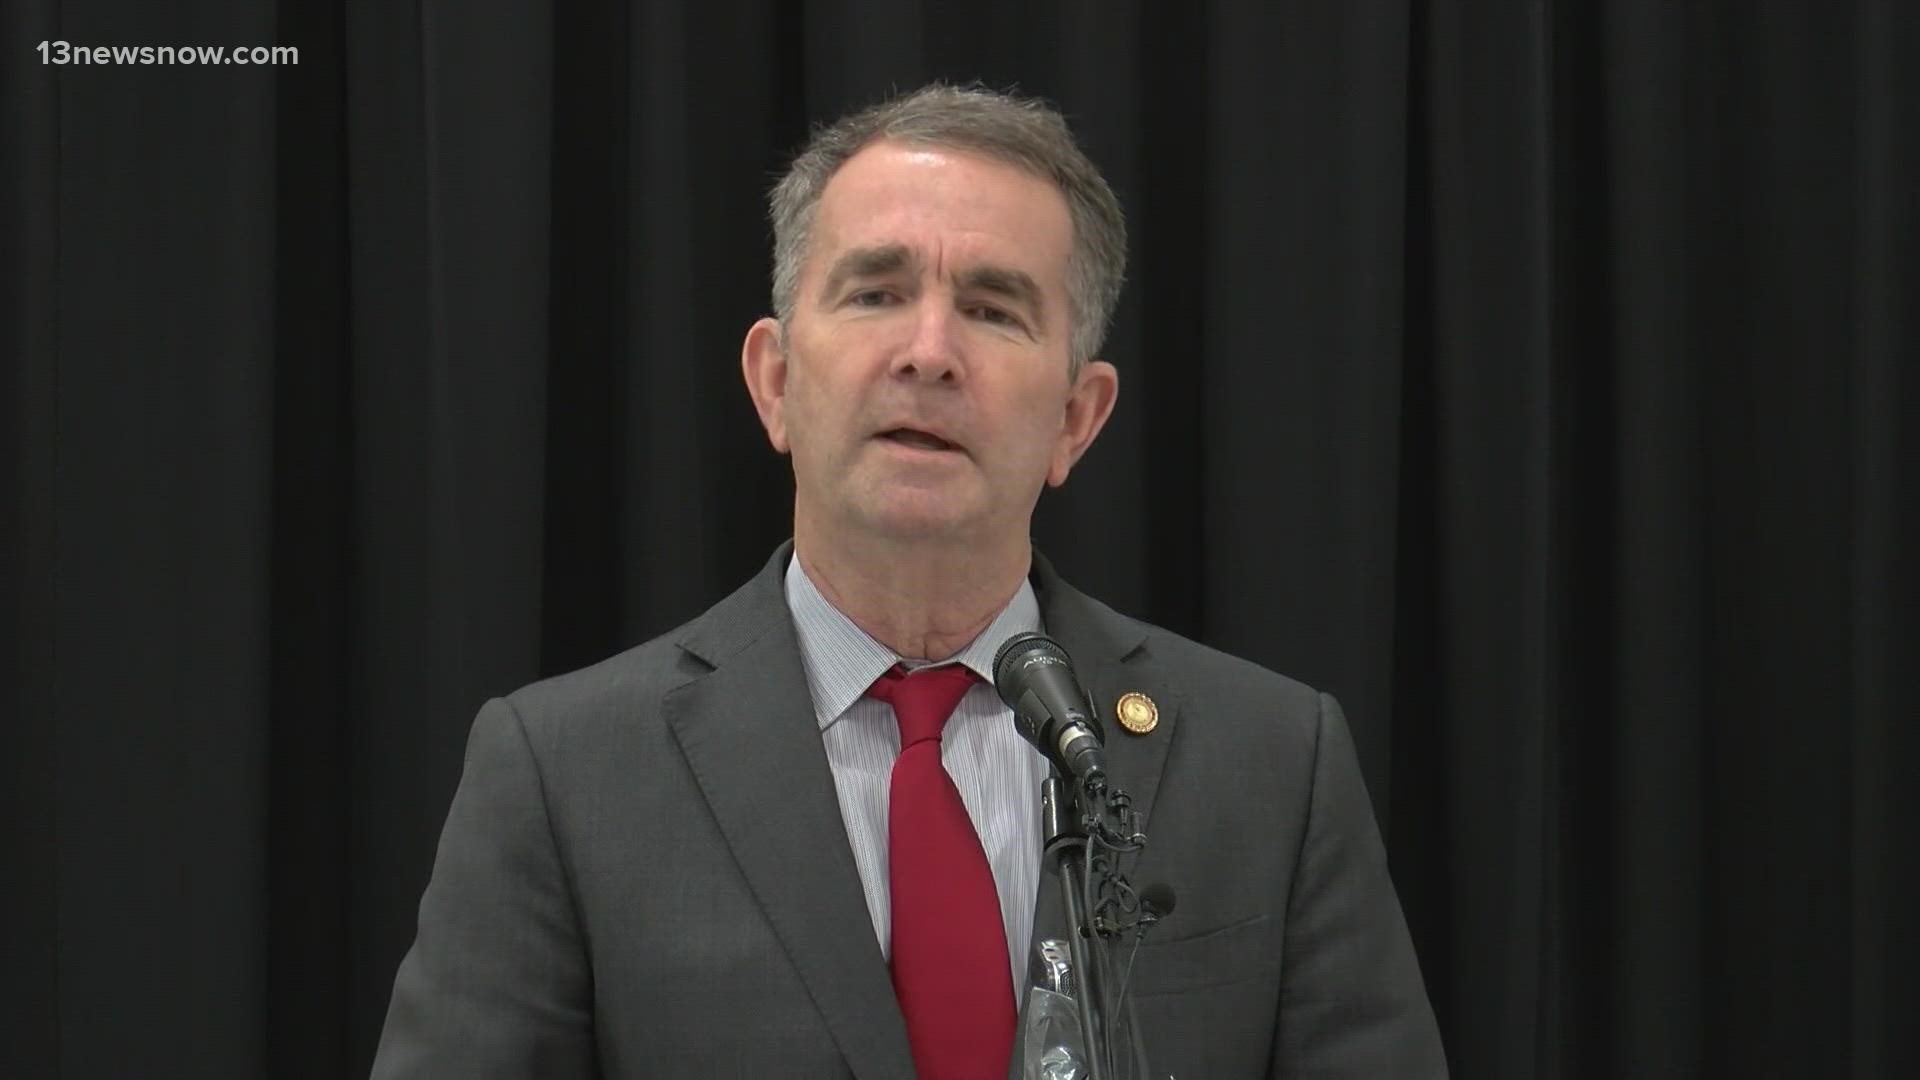 Northam said the funding will put Virginia on track to be one of the first states to achieve universal broadband access.